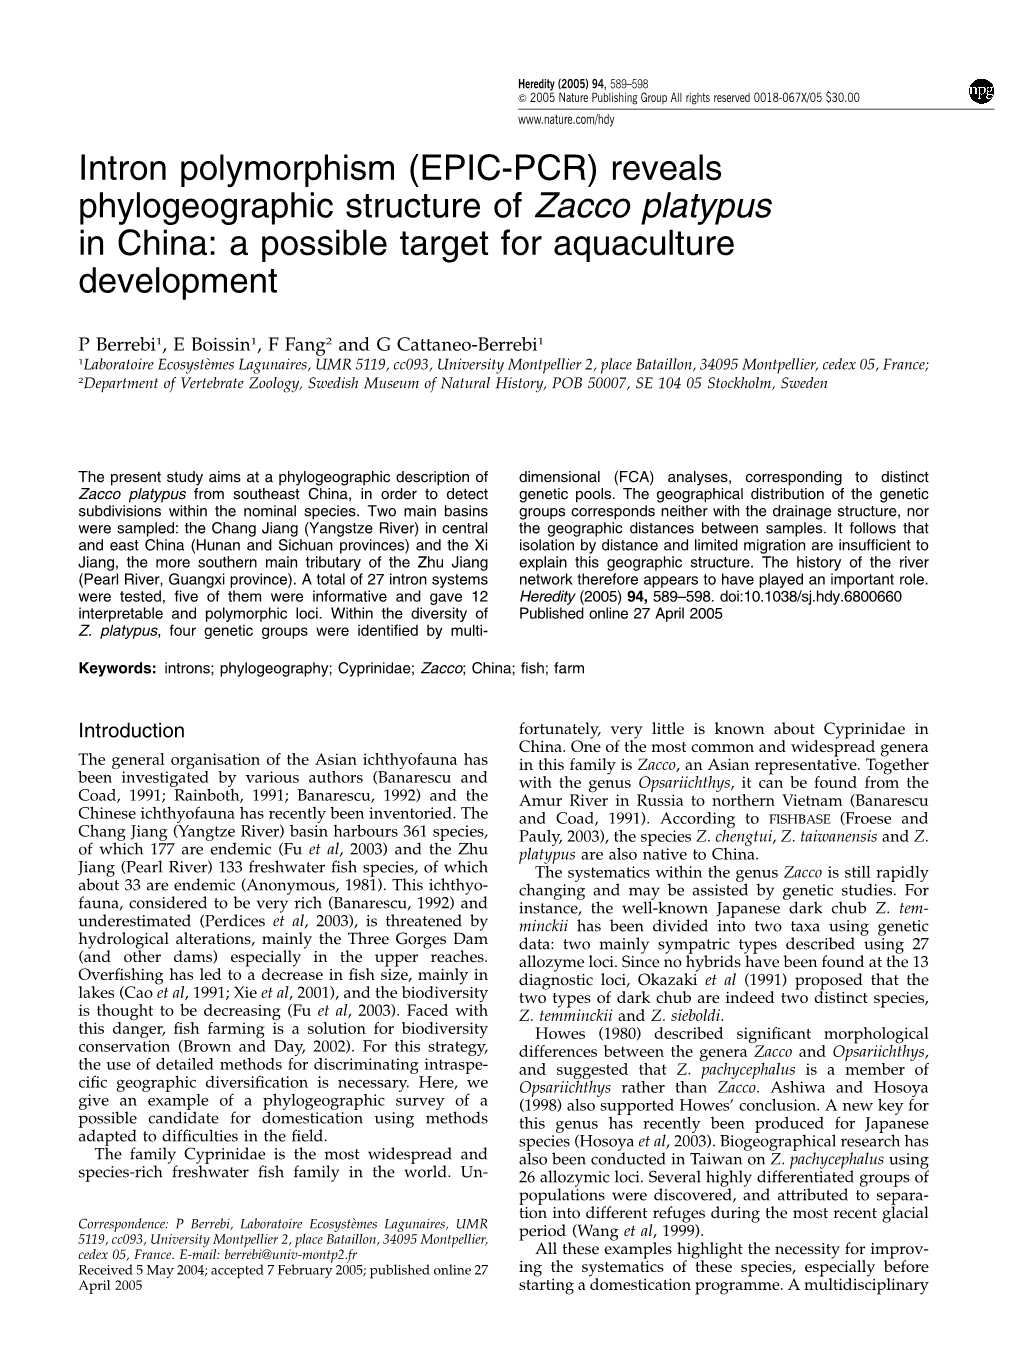 Reveals Phylogeographic Structure of Zacco Platypus in China: a Possible Target for Aquaculture Development